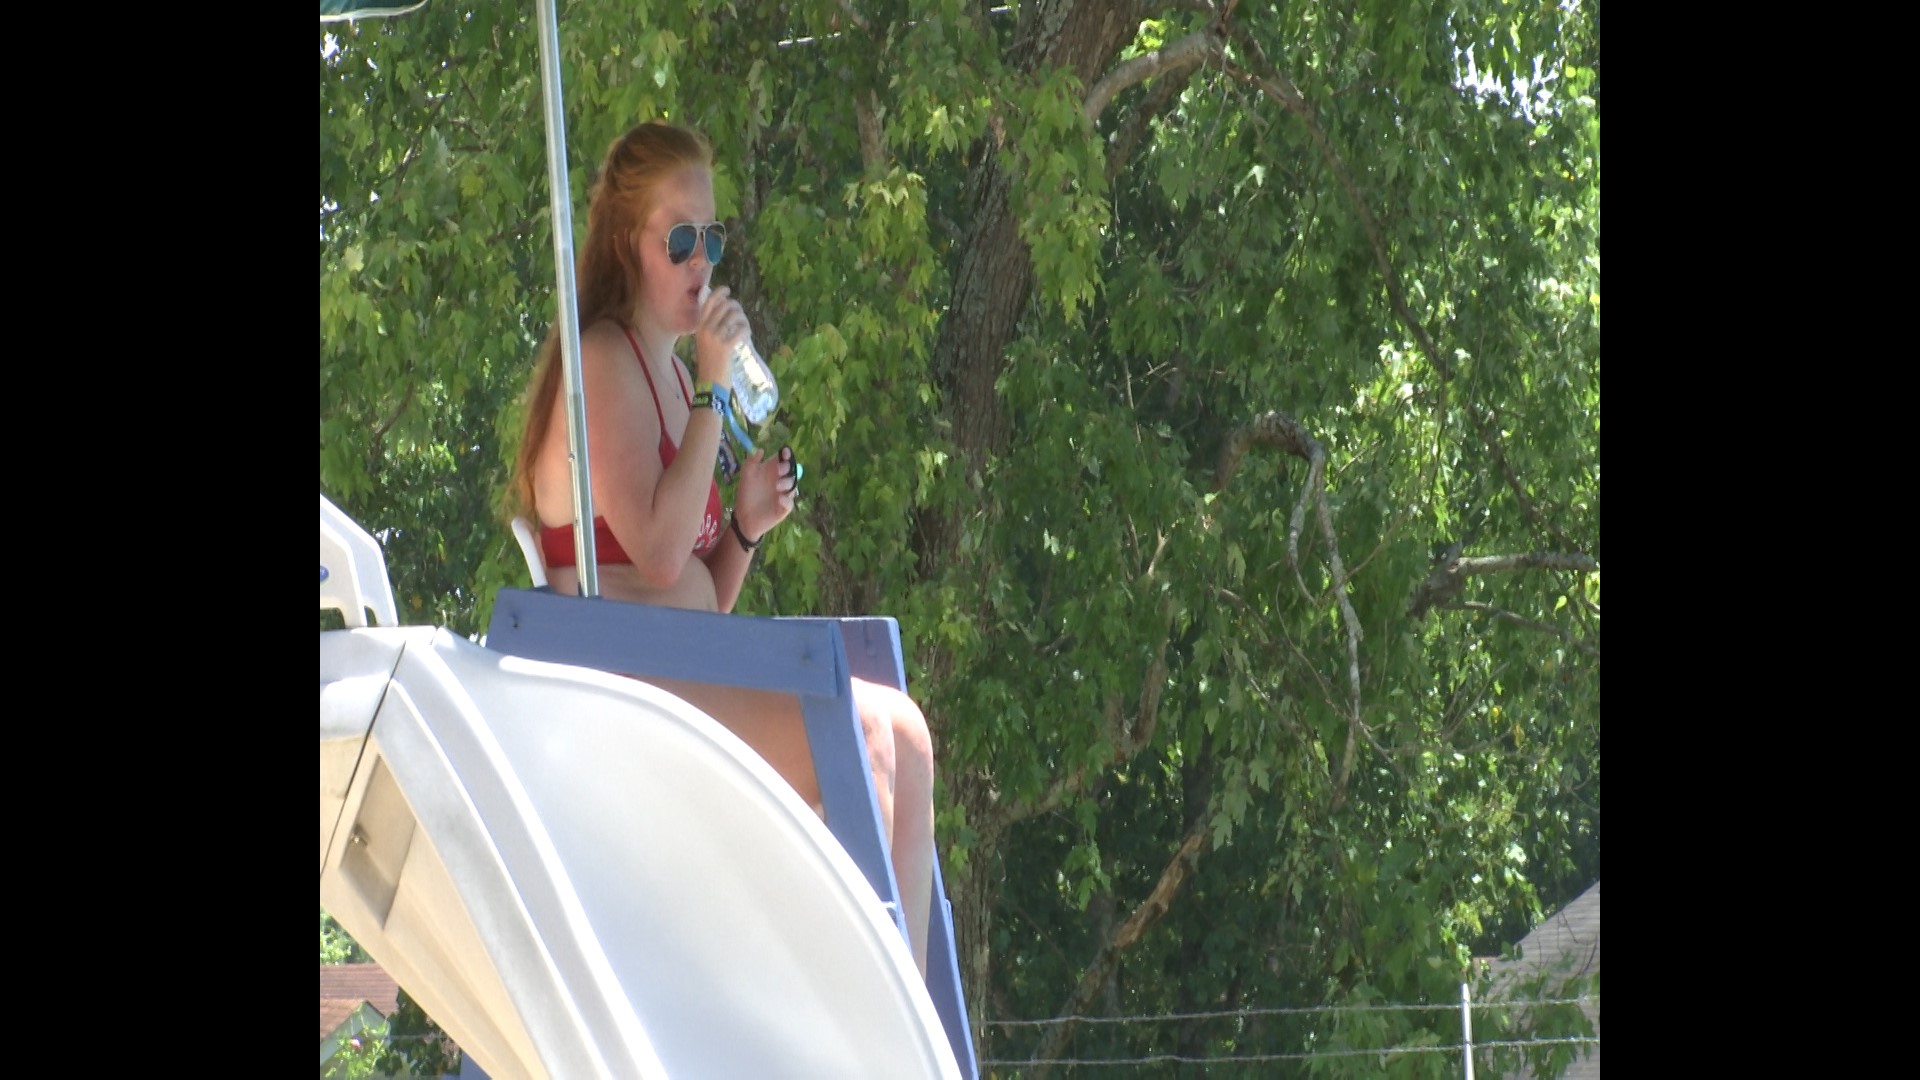 With a lot of commotion going on around pools, lifeguards want you to remember to be safe.